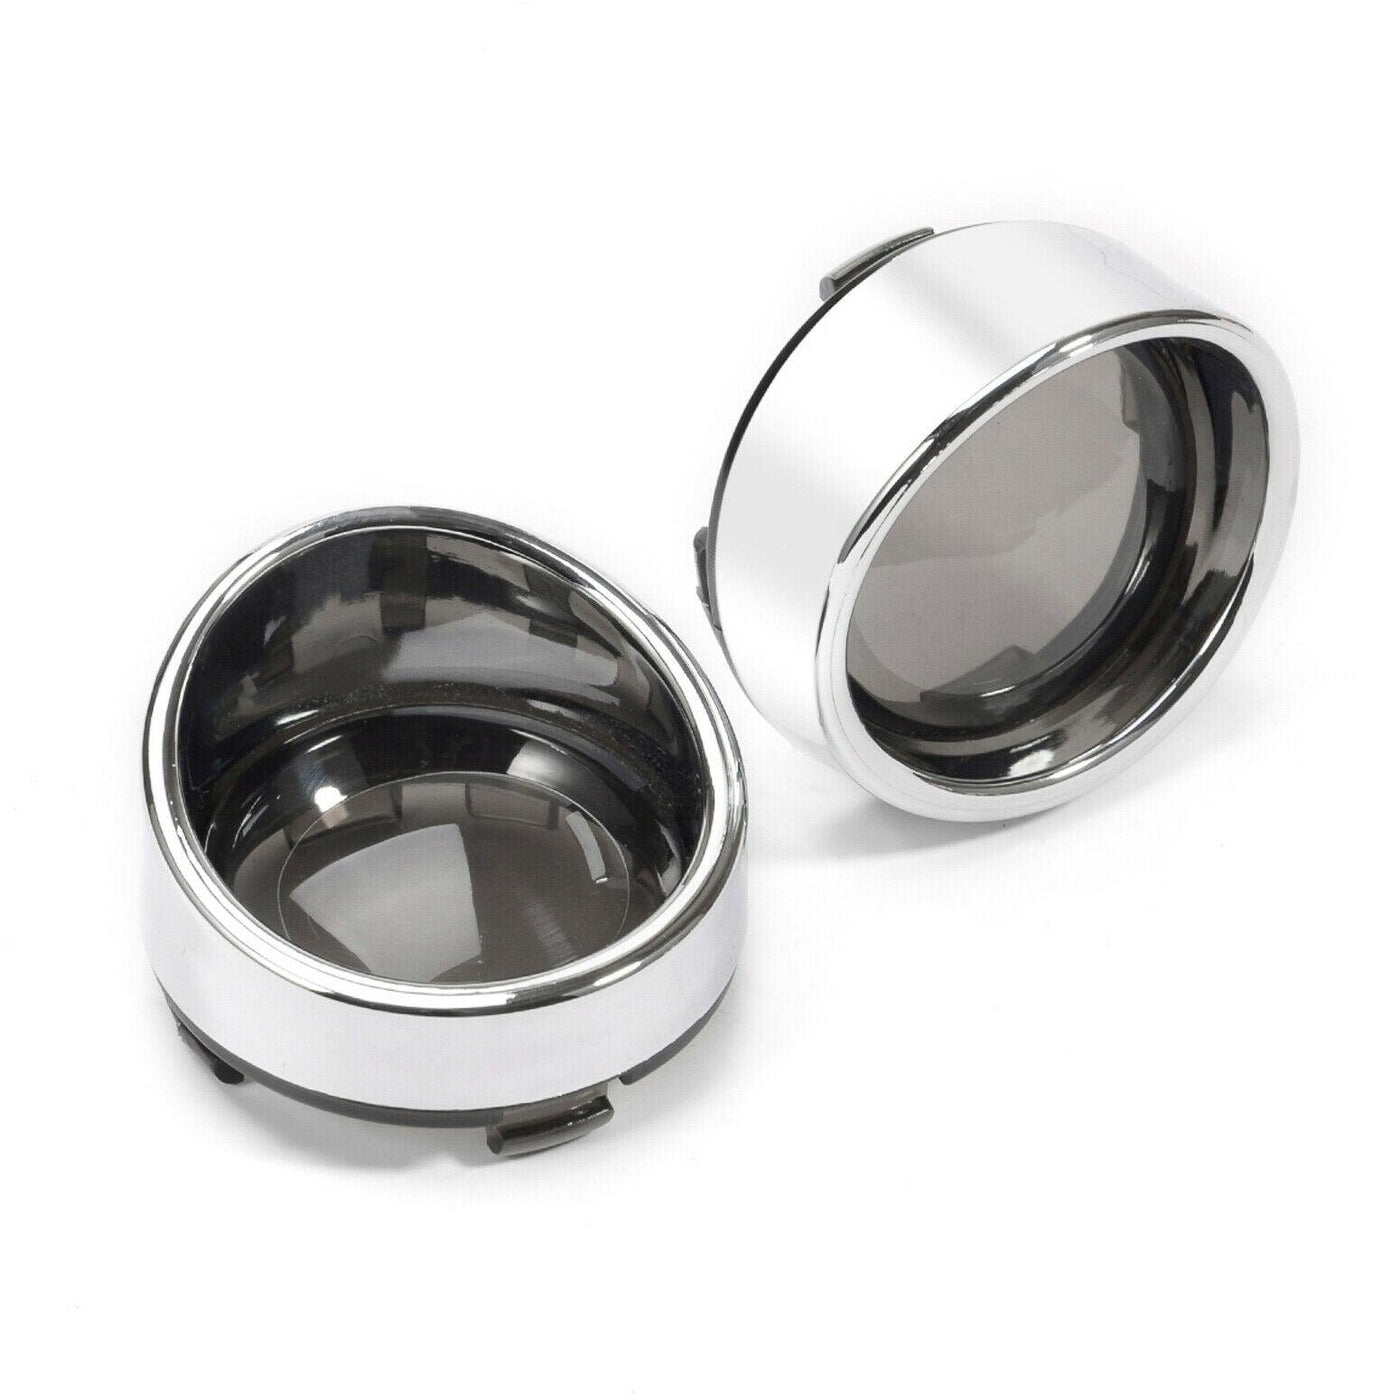 2" Turn Signal Chrome Bezels Visor Lens Cover Trim Fit for Harley Sportster Dyna - Moto Life Products